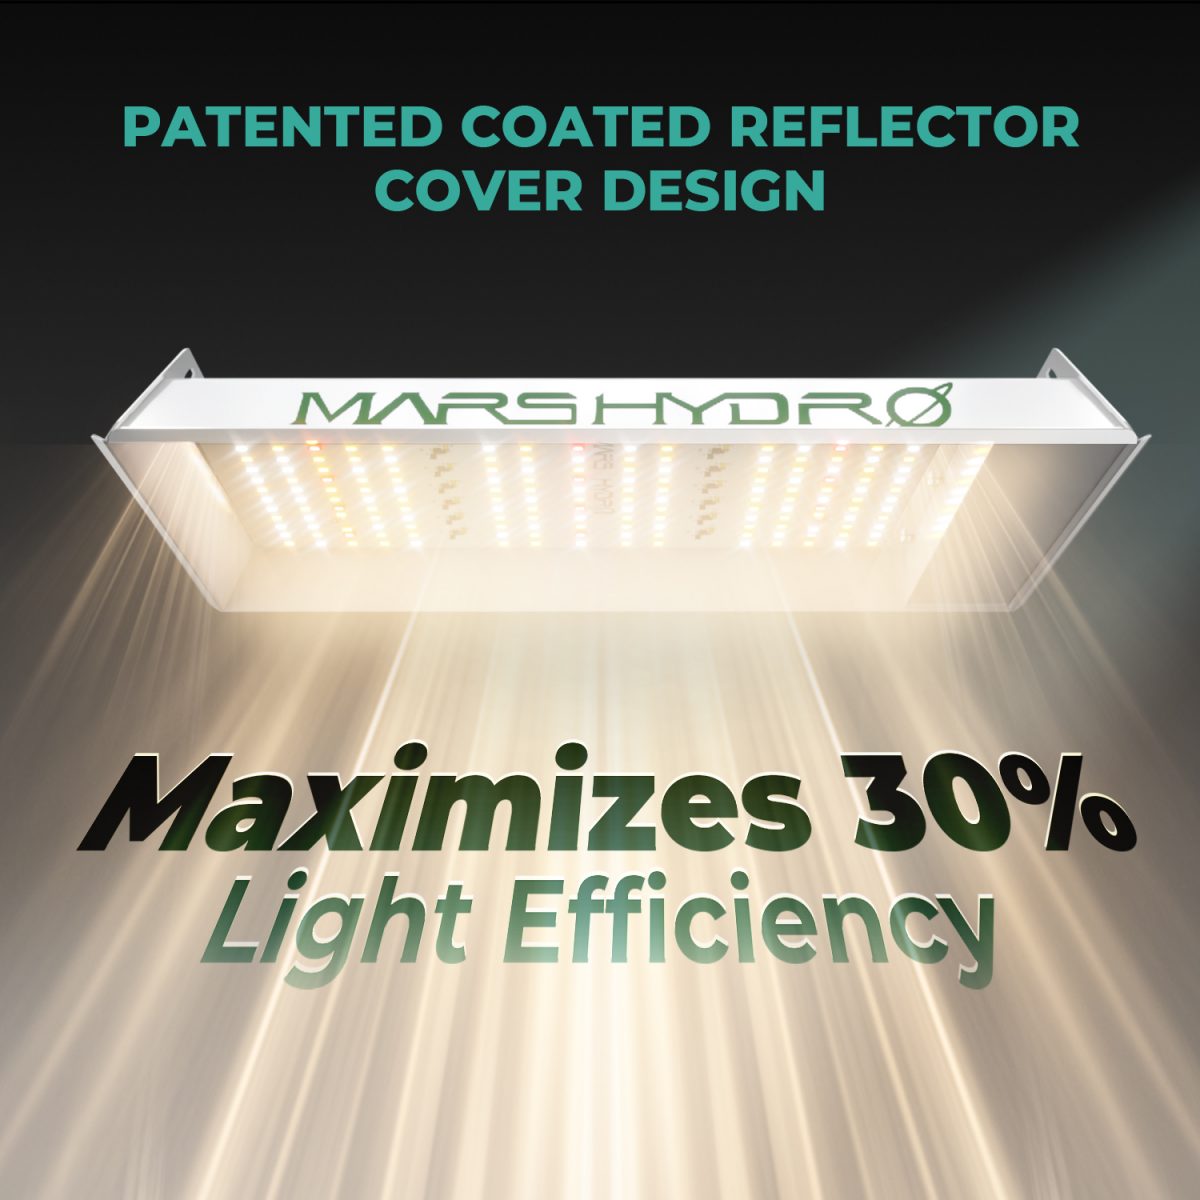 Mars Hydro TS600 PATENTED COATED REFLECTOR COVER DESIGN